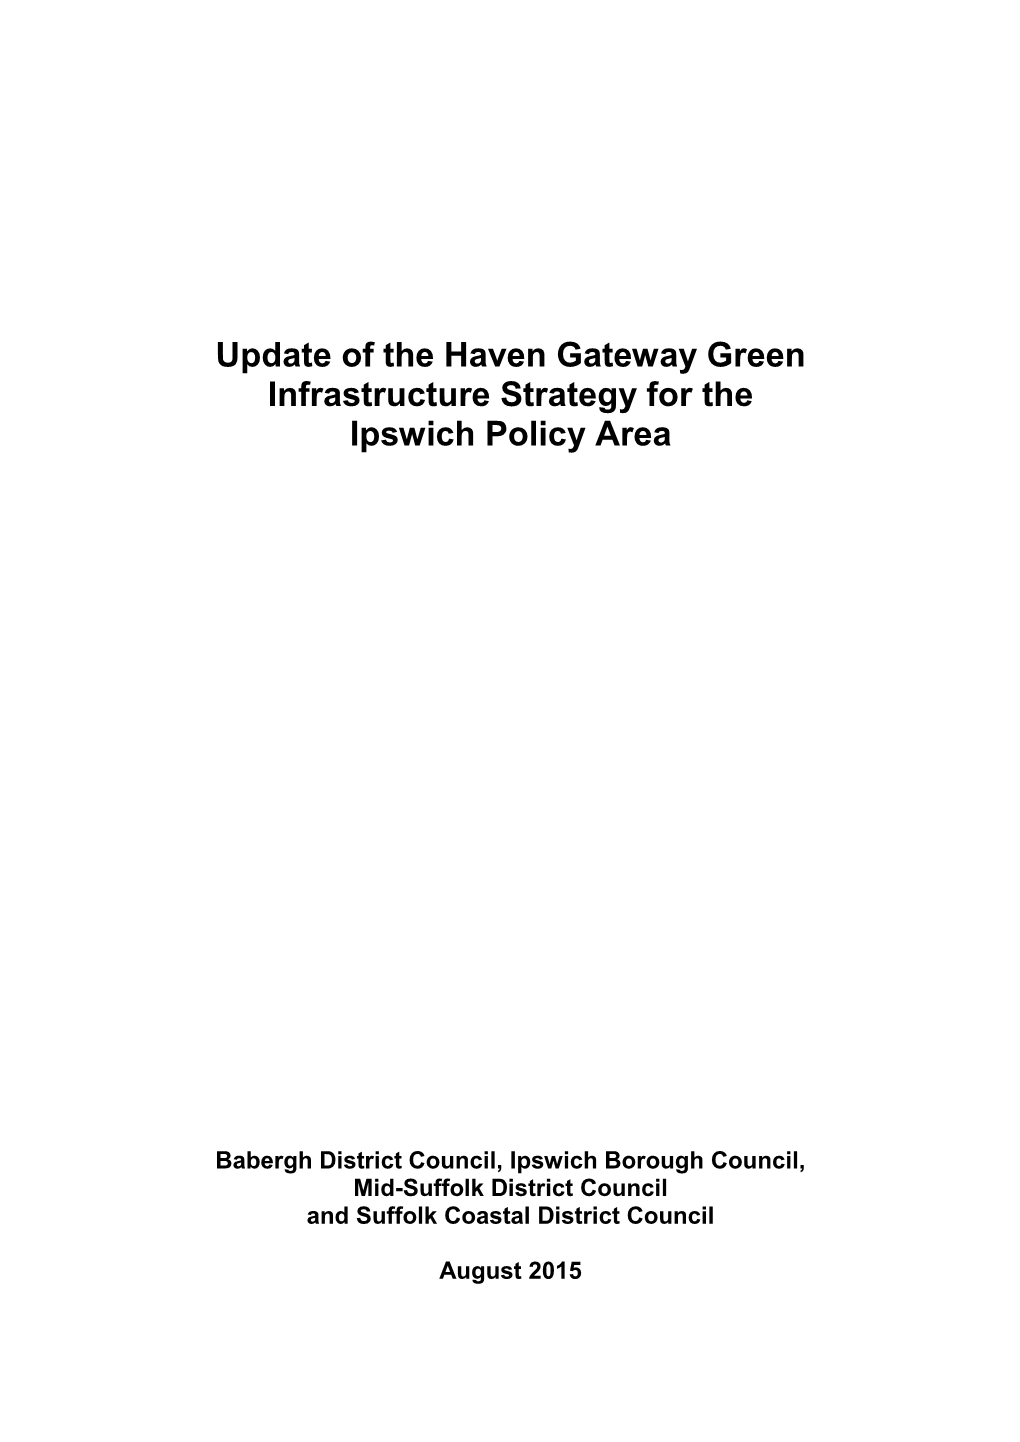 Haven Gateway Green Infrastructure Strategy for the Ipswich Policy Area